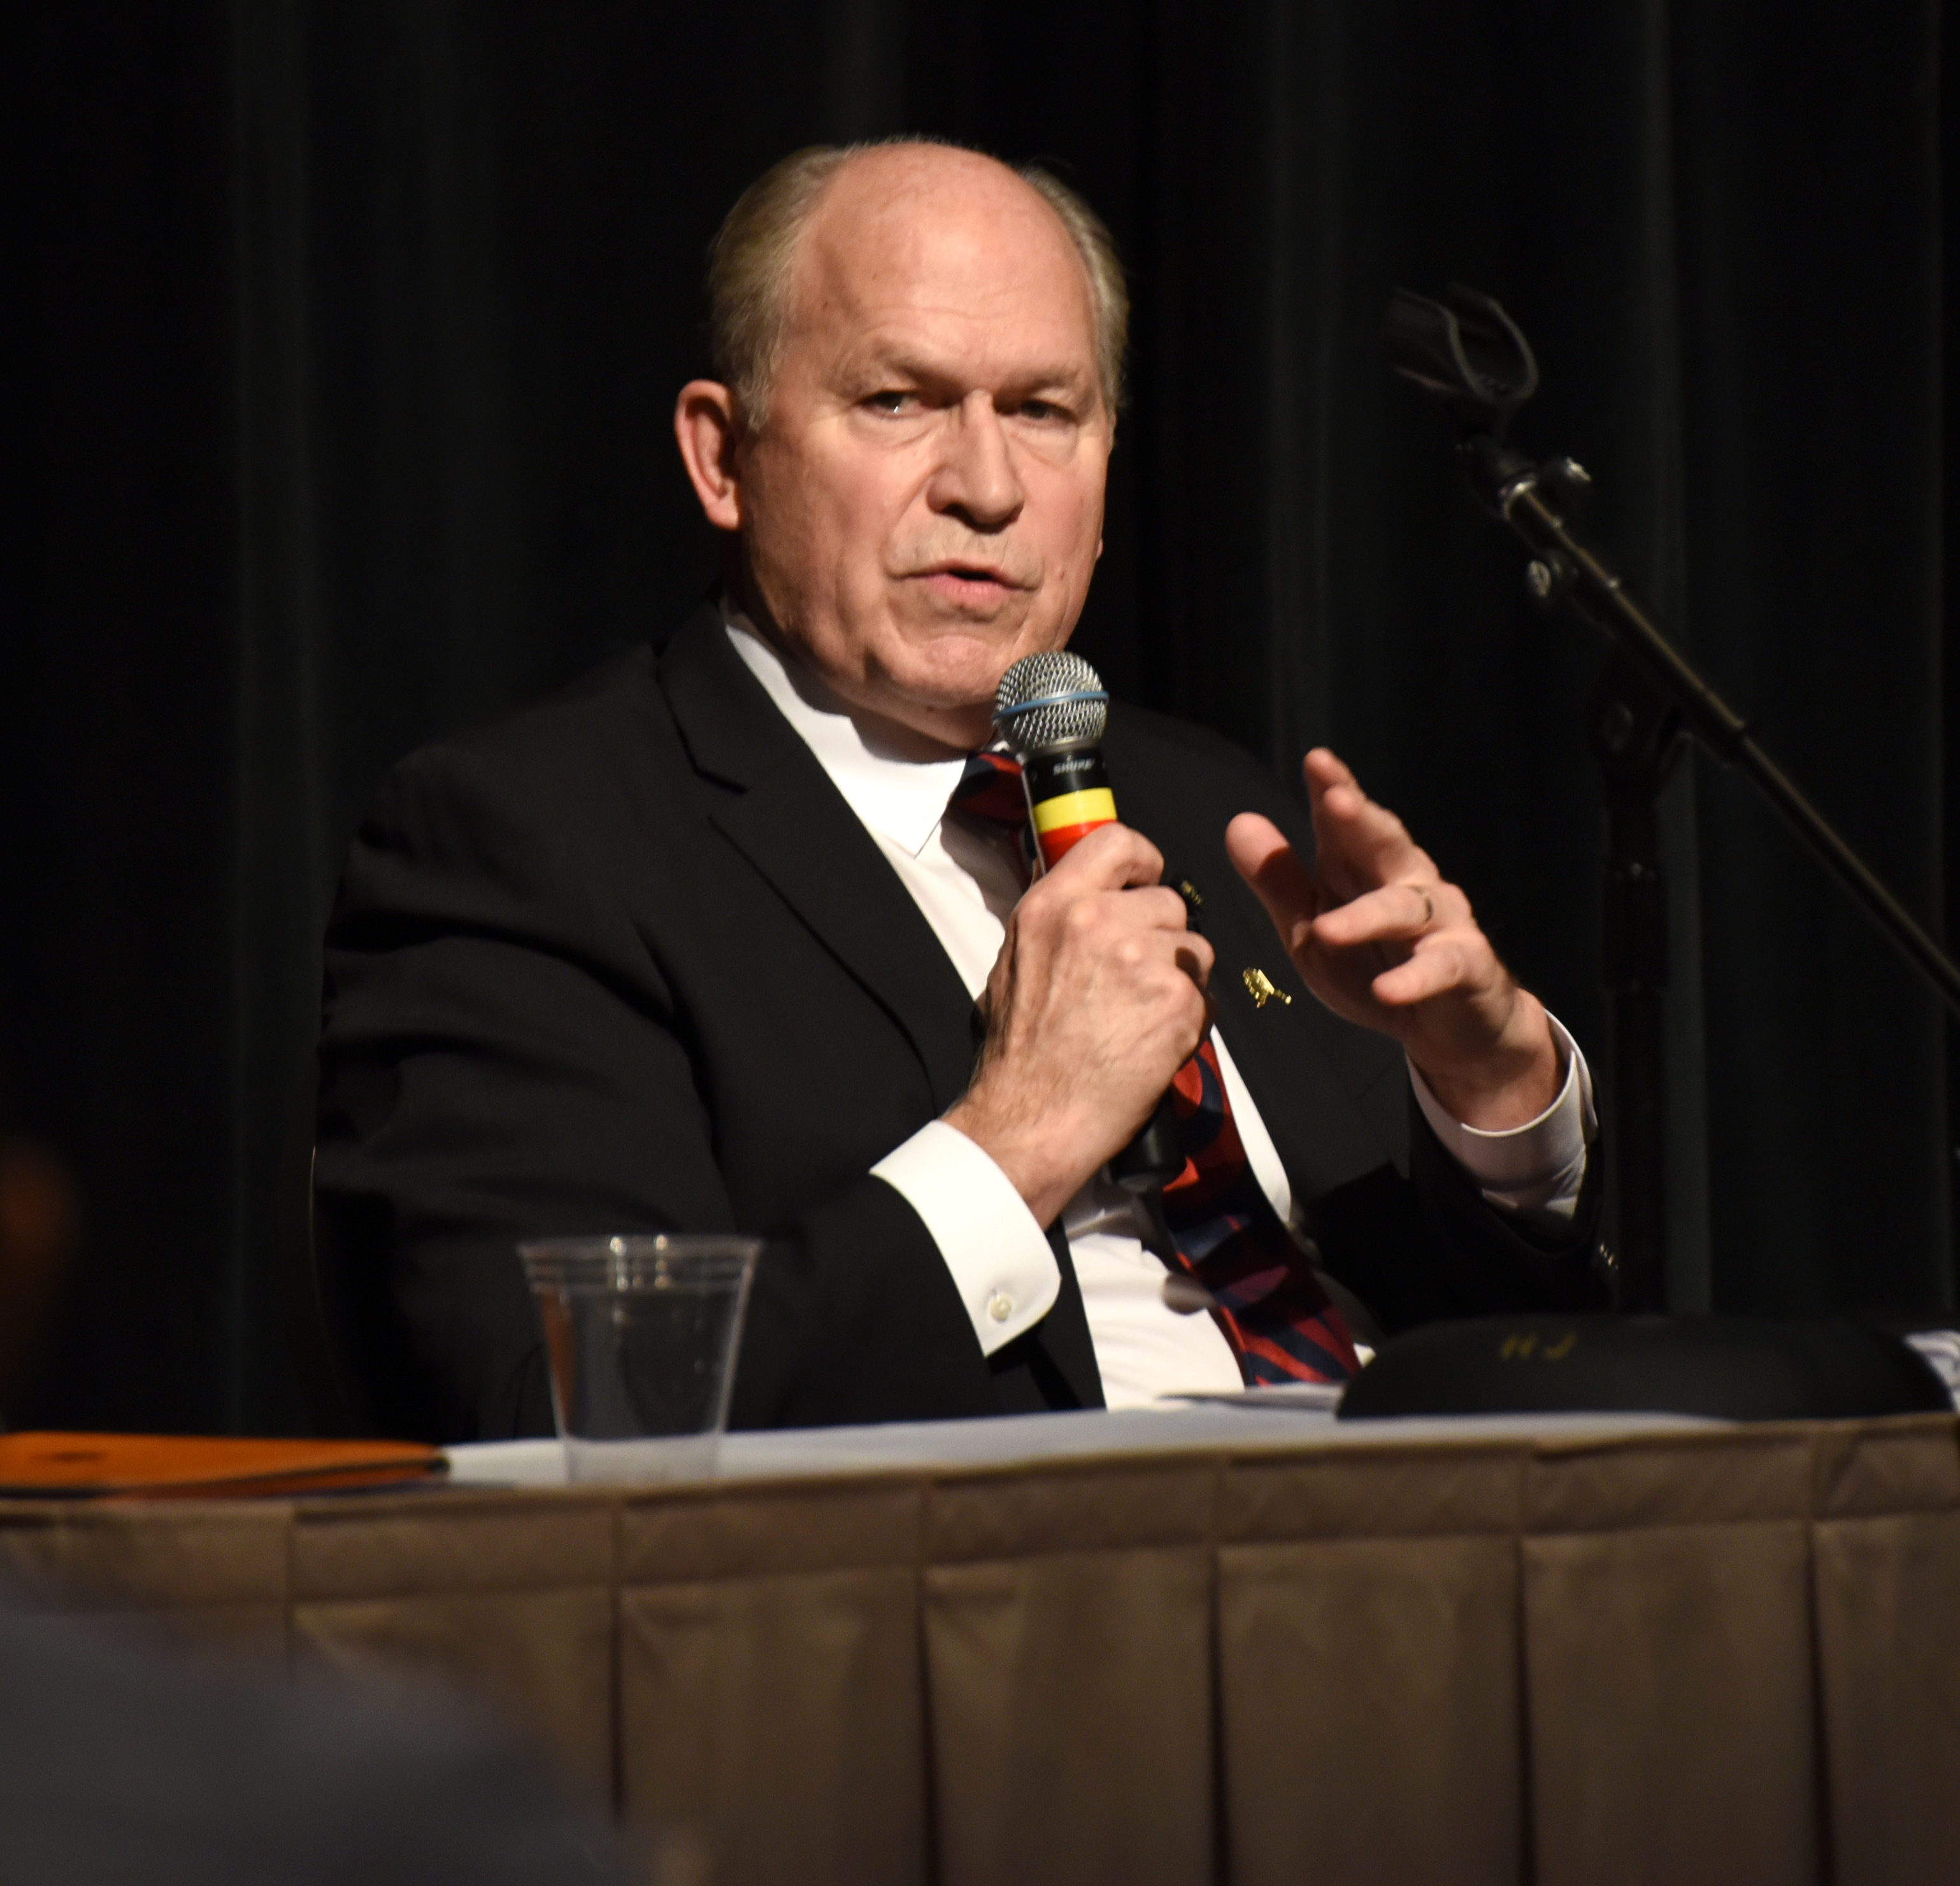 Gov. Bill Walker during a Q&A session for lawmakers with the Governor and key cabinet members to discuss legislator’s plans for reorganizing the Permanent Fund, April 20, 2016. (Photo by Skip Gray, 360 North)